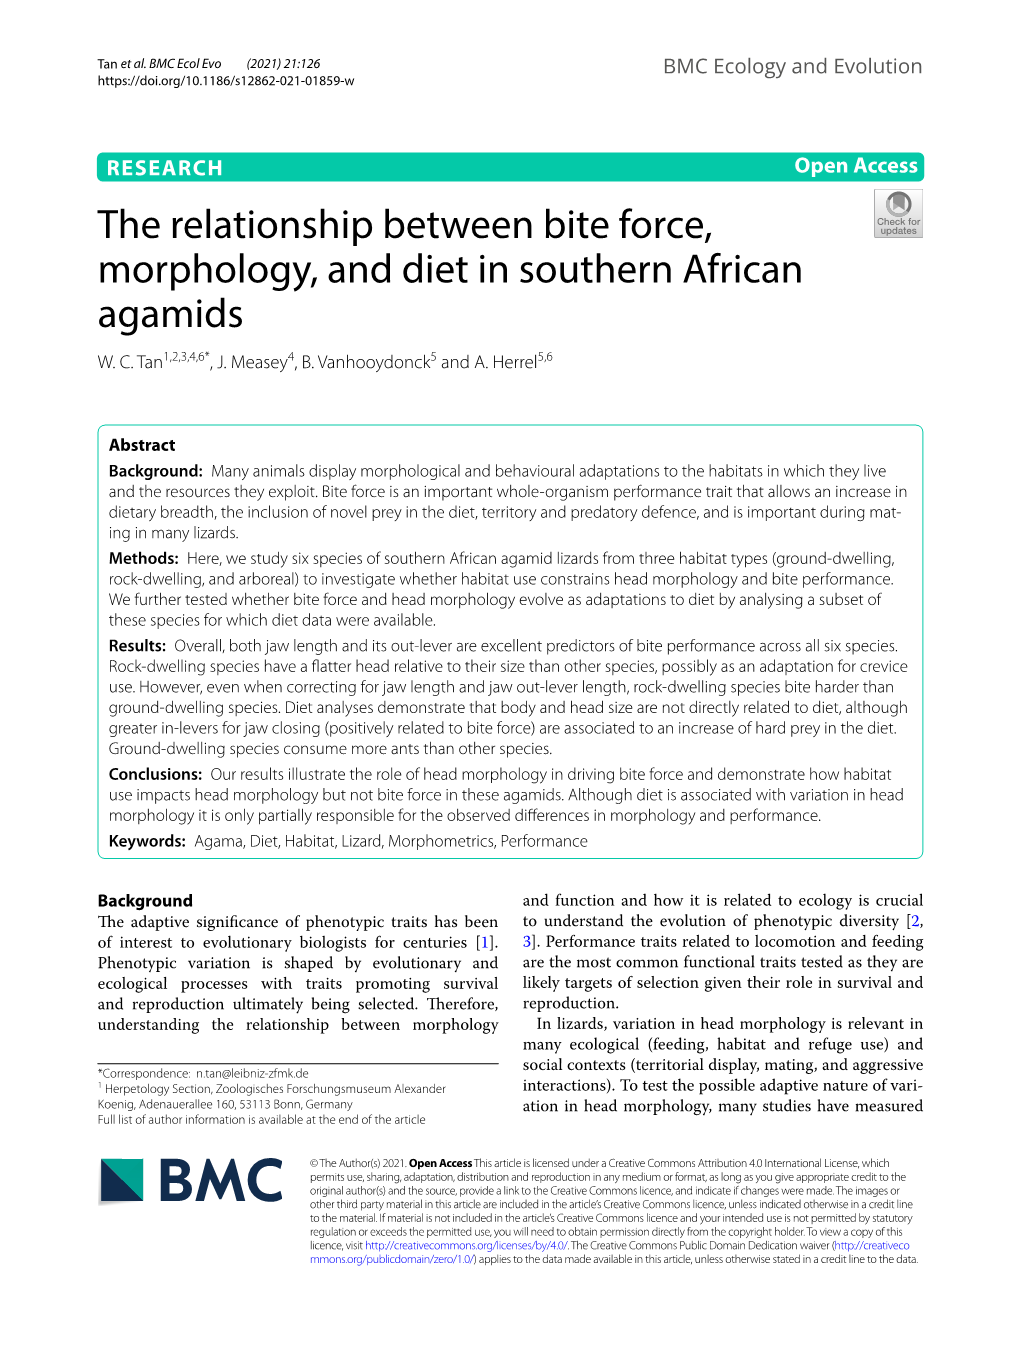 The Relationship Between Bite Force, Morphology, and Diet in Southern African Agamids W